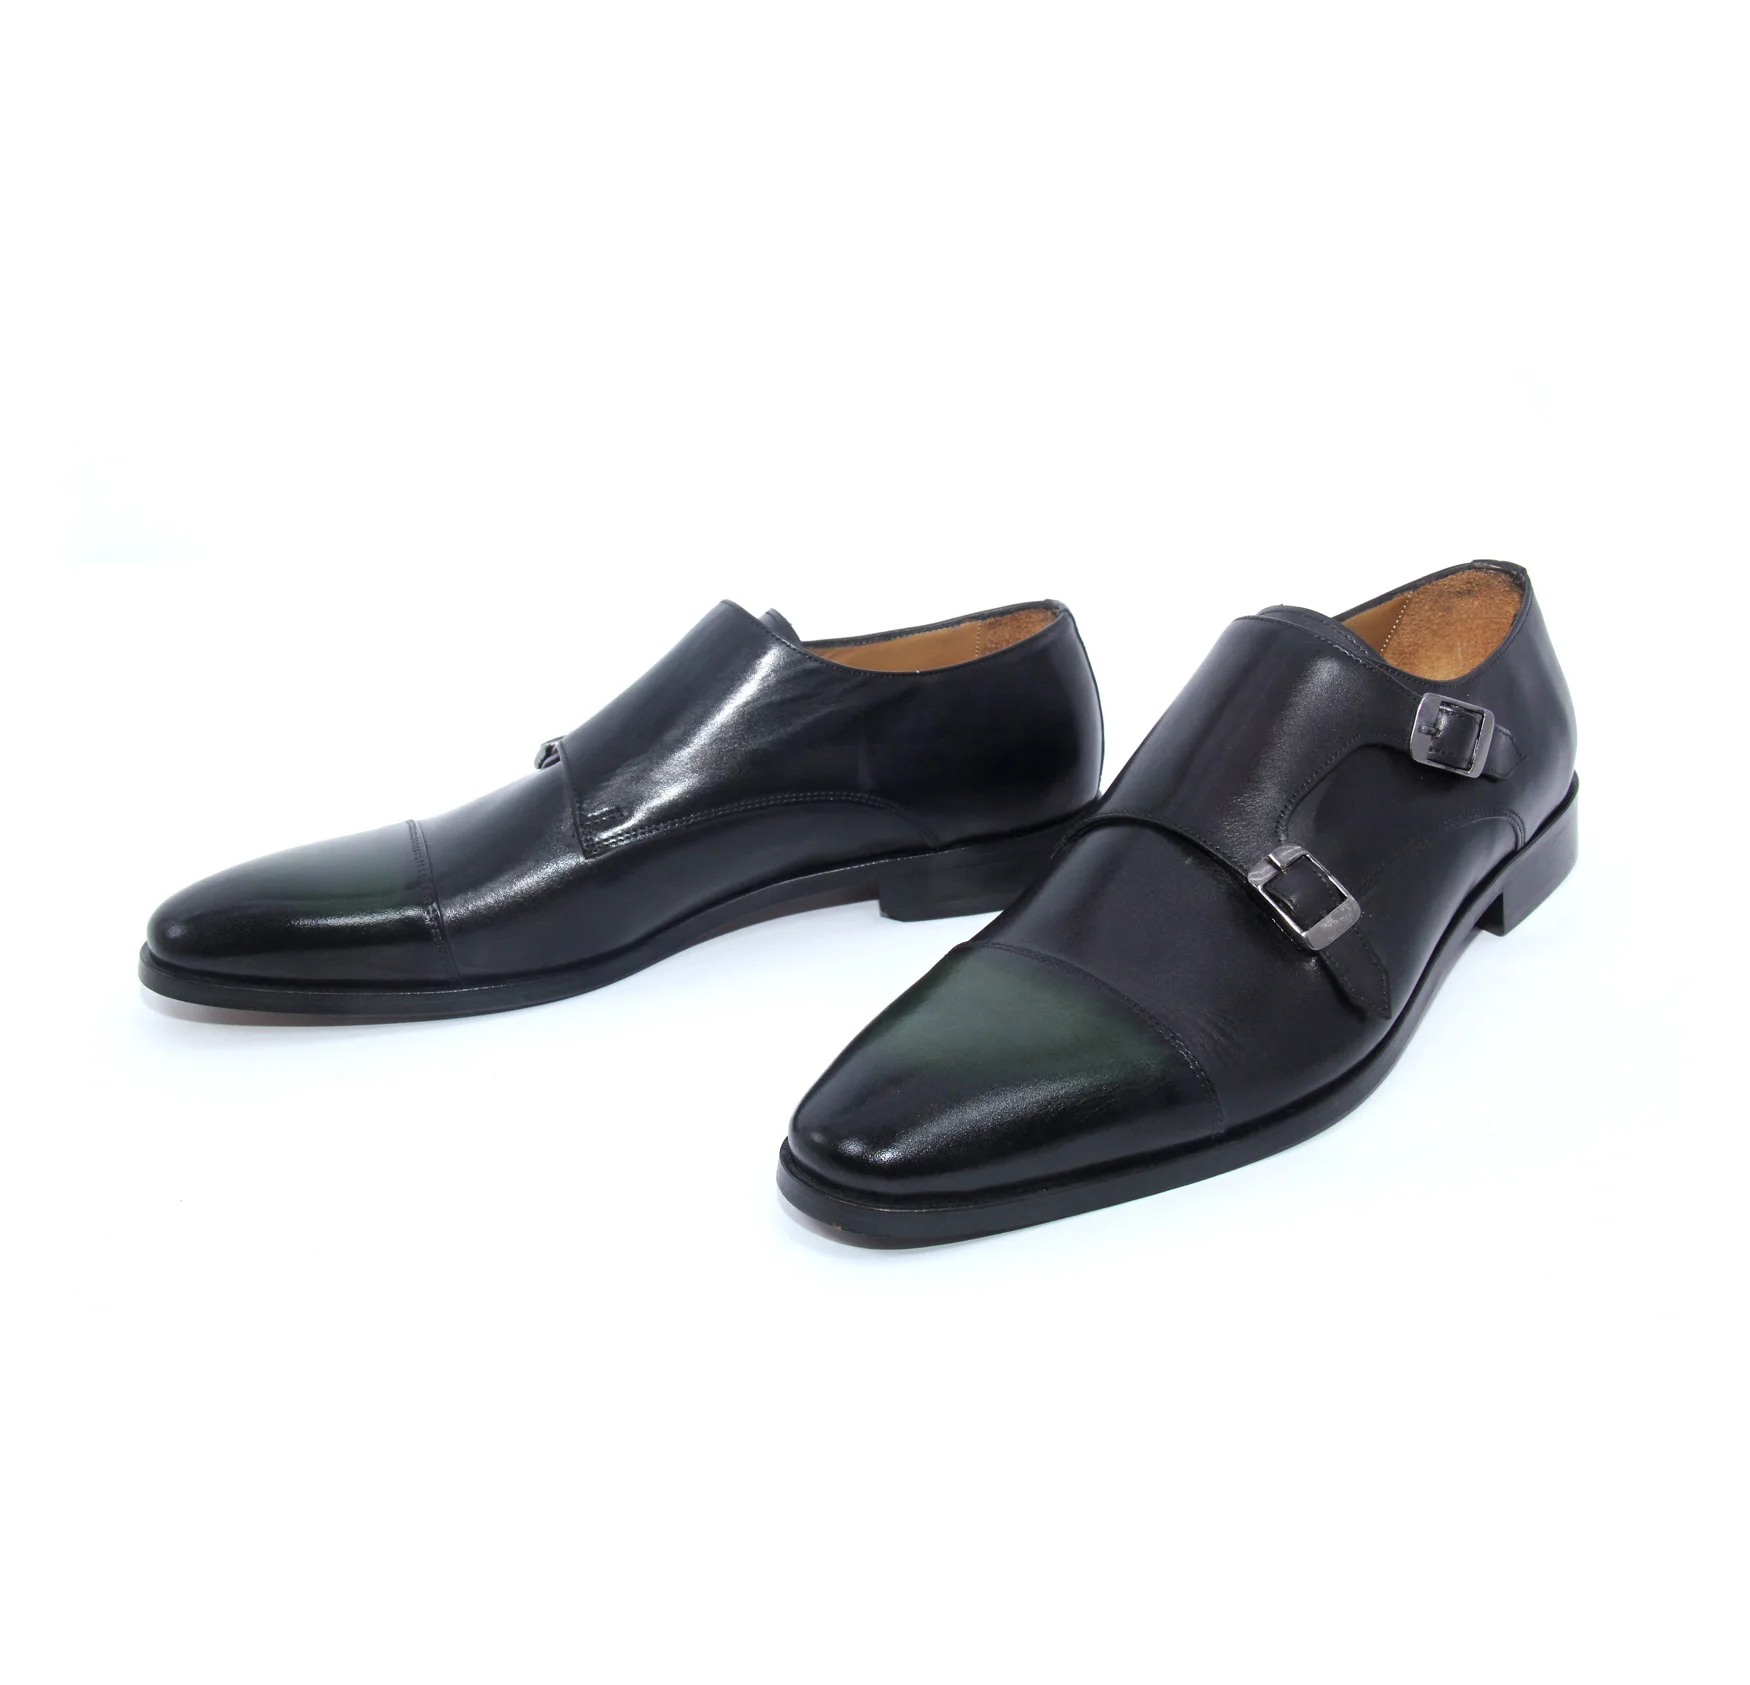 

Handmade Black Green Double Monk Strap Shoes, Genuine Leather Soles, Natural Calf Skin, Men's Classic Formal Footwear